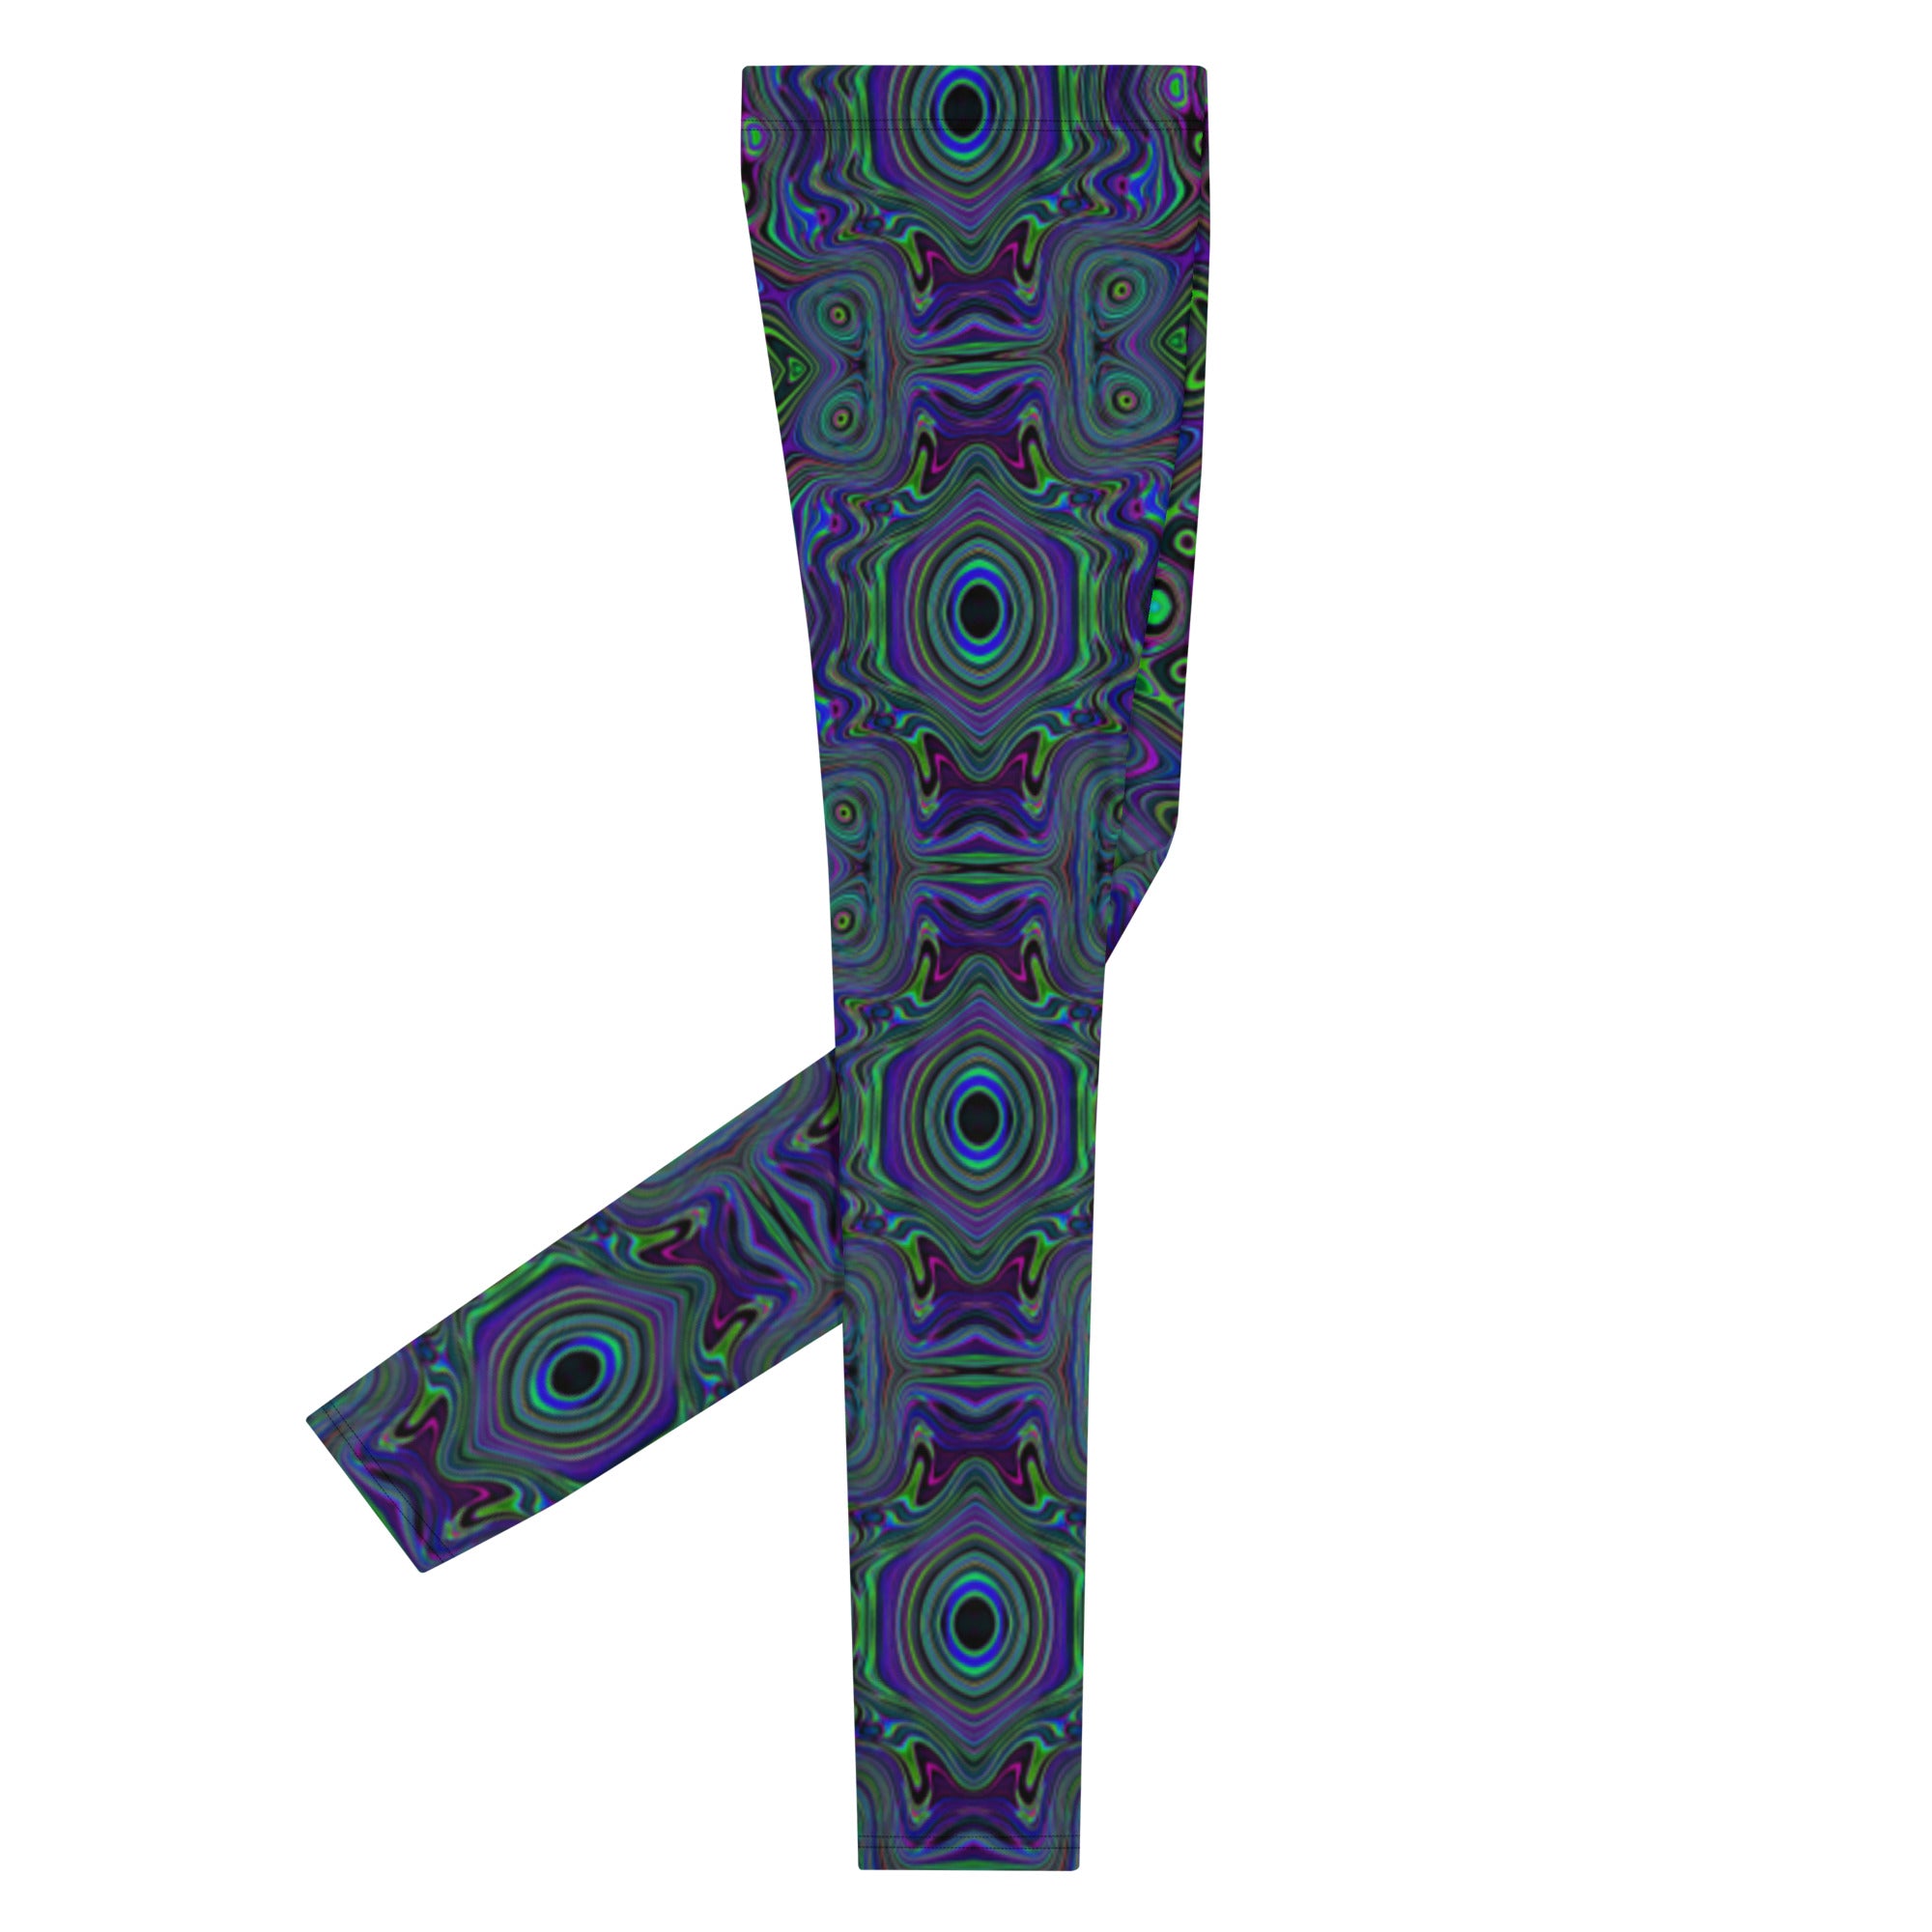 Men's Leggings, Trippy Retro Royal Blue and Lime Green Abstract